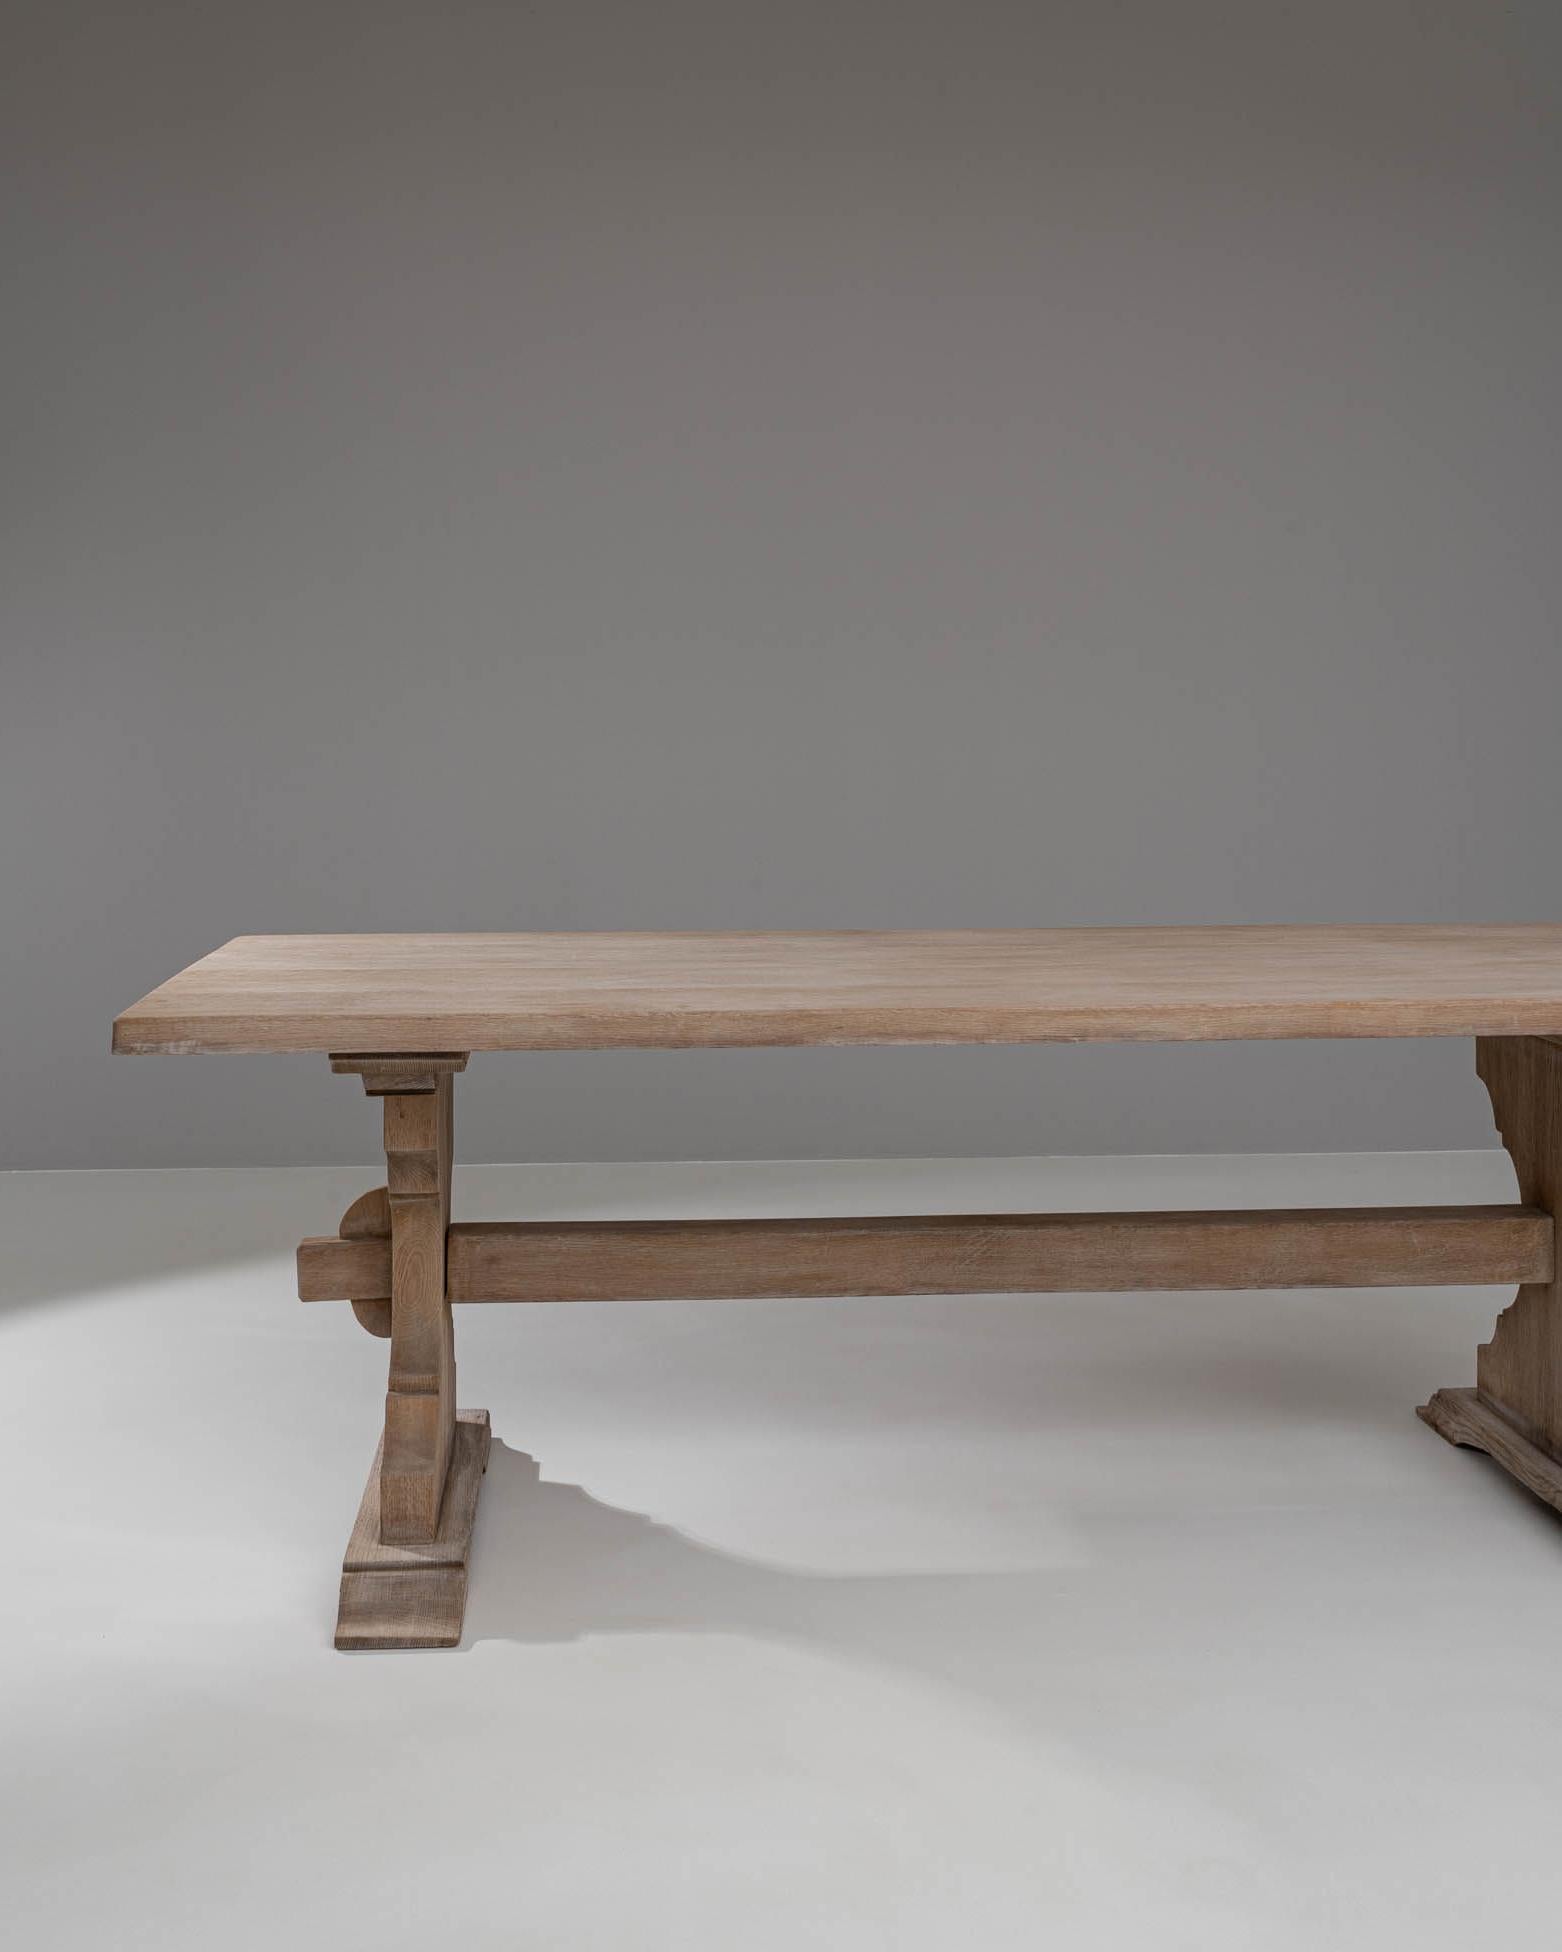 This 20th Century Belgian Bleached Oak Dining Table epitomizes timeless elegance with its robust and refined design. Crafted from high-quality oak, the table features a beautifully bleached finish that highlights the natural grain and texture of the